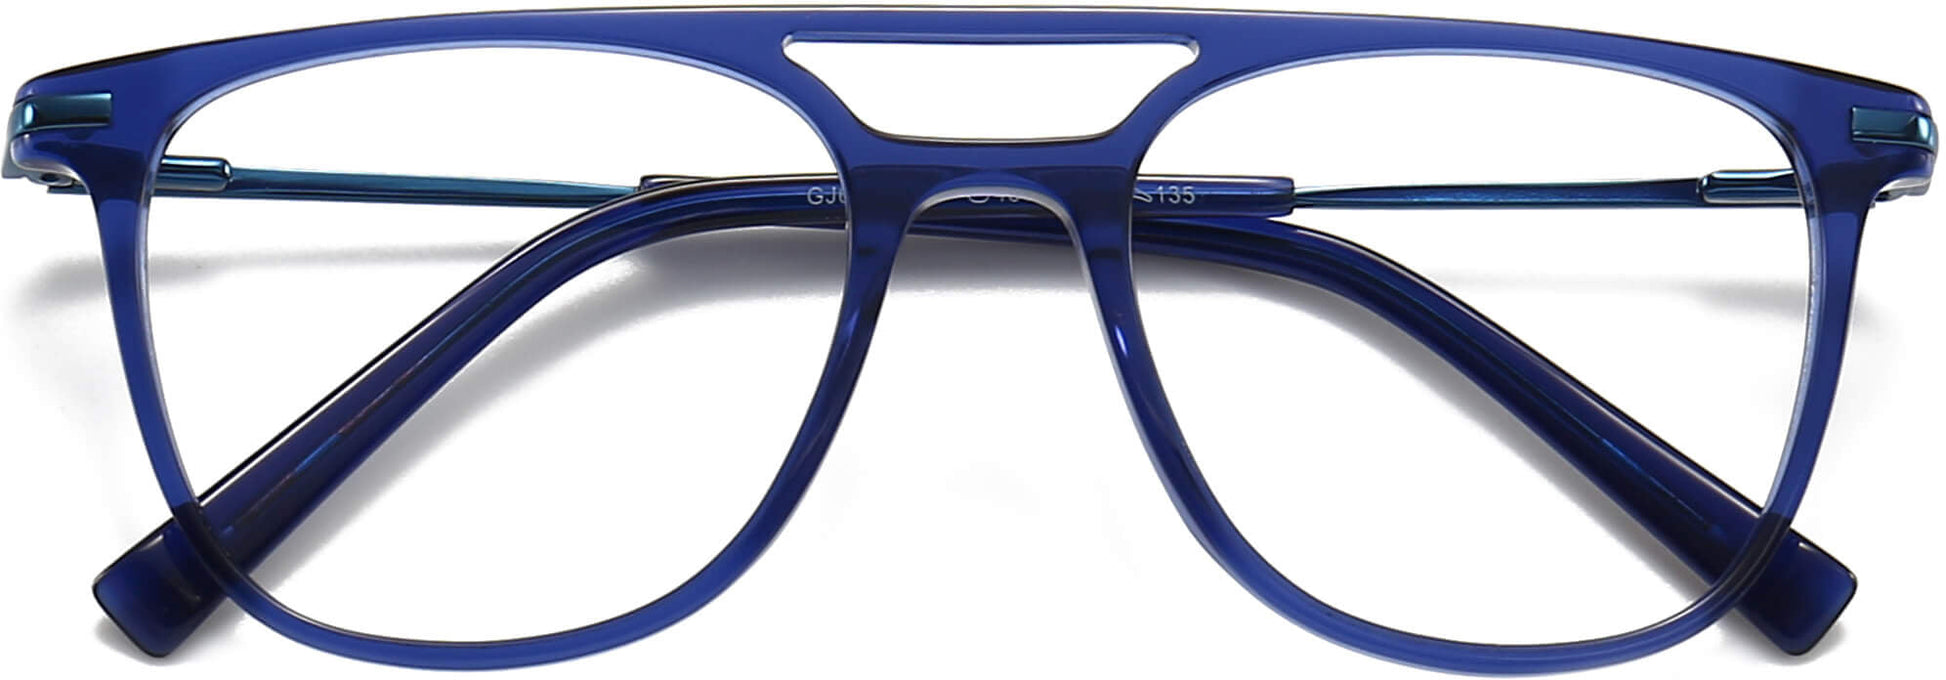 Ahmad Round Blue Eyeglasses from ANRRI, closed view